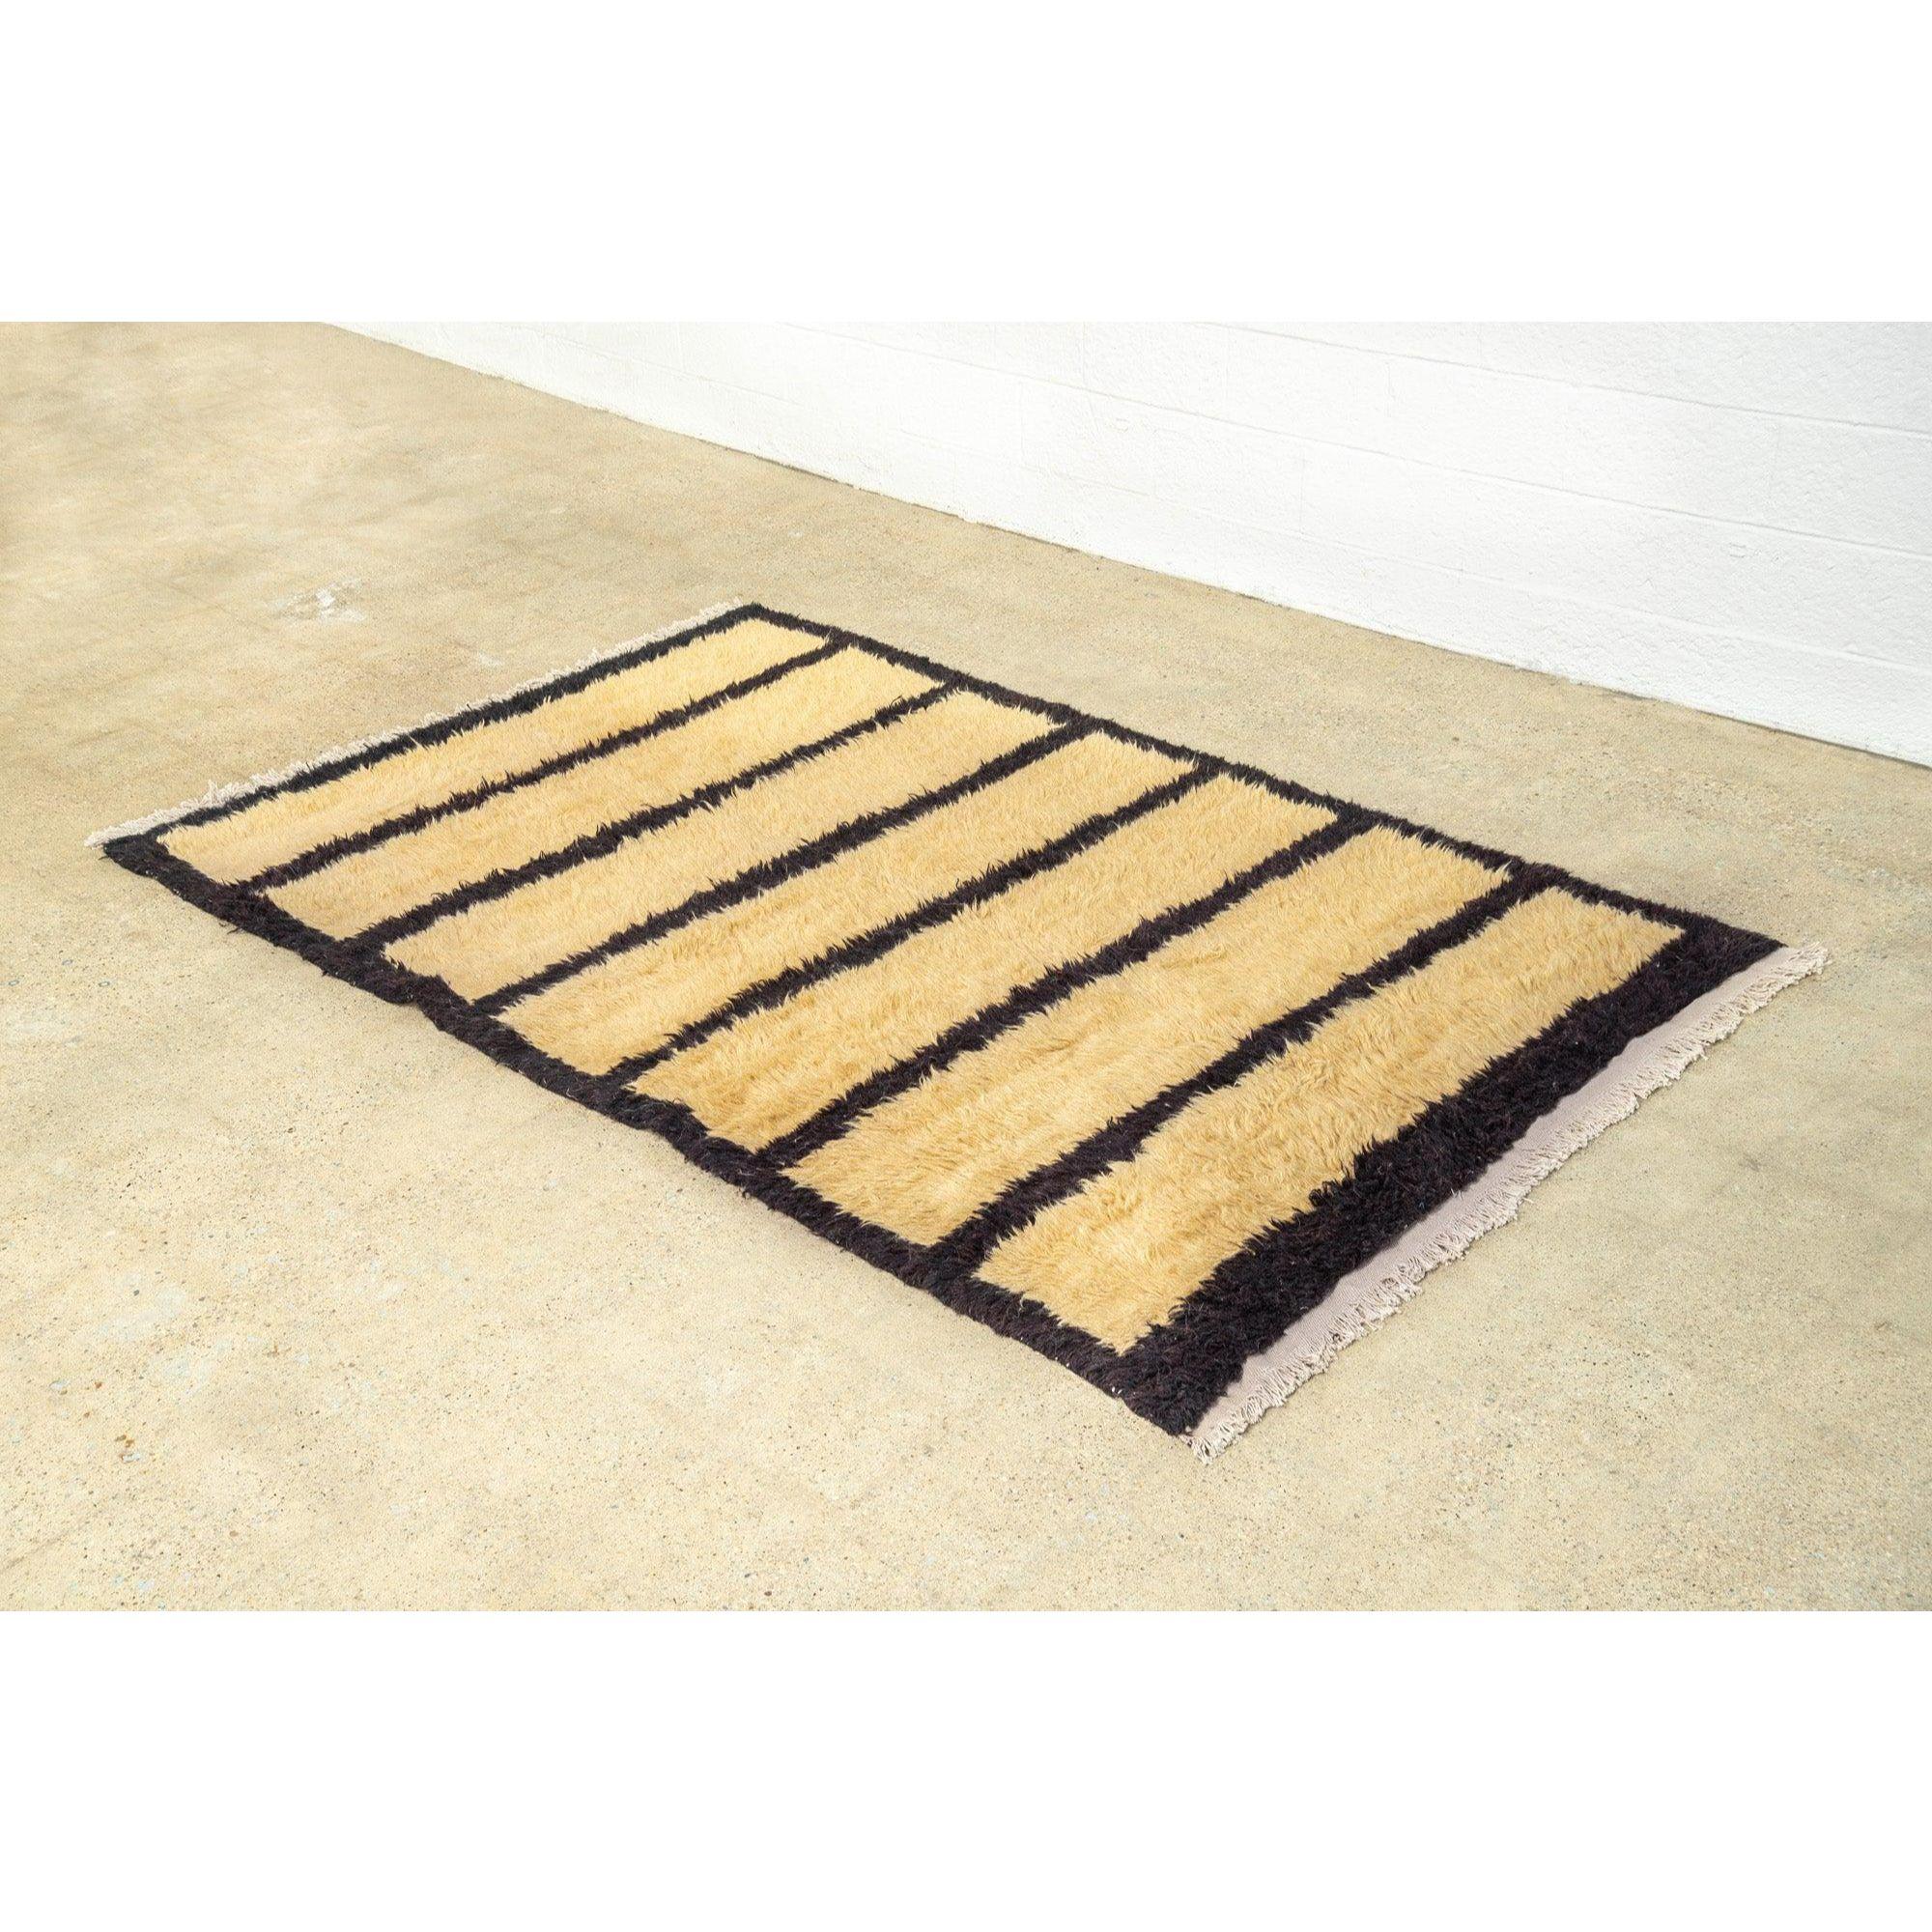 Vintage Turkish Floor Rug in Beige and Black Striped Shaggy Wool In Good Condition For Sale In Detroit, MI